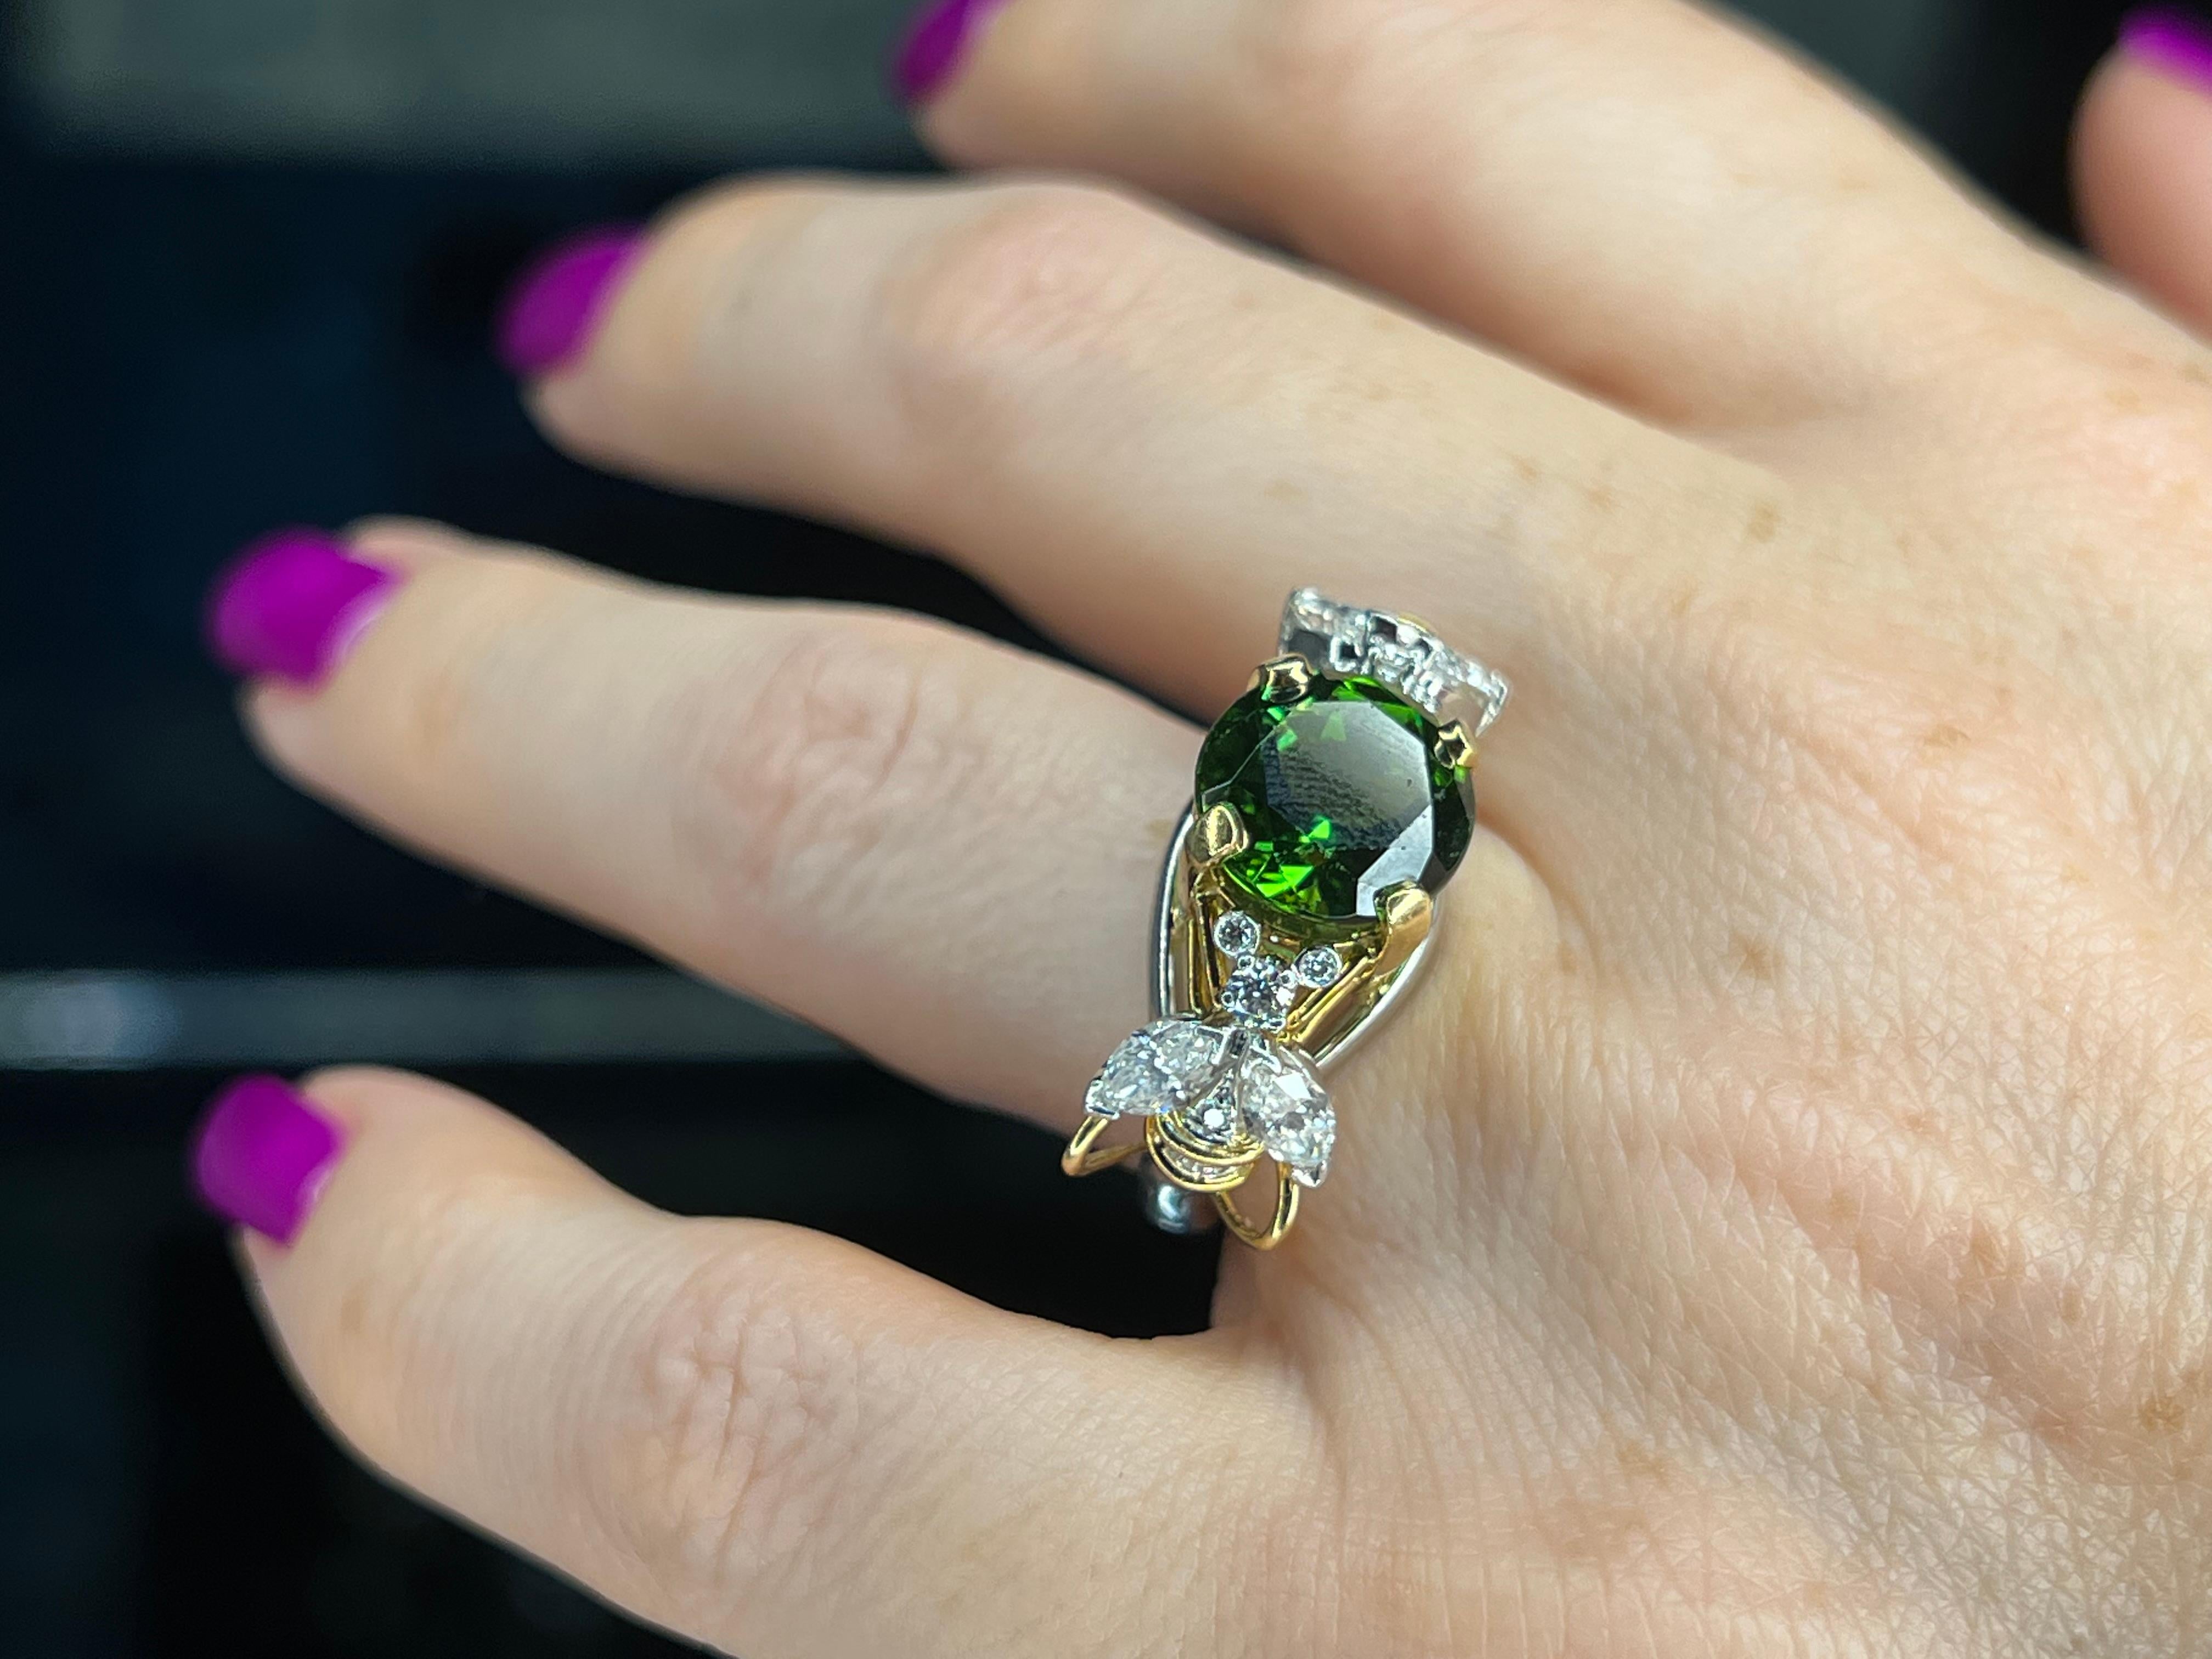 Offered here is a rare Schlumberger for Tiffany & Co iconic two bee's ring centered with a magnificent green tourmaline.
Green tourmaline measurements is 10mm by 6.55mm.
Ring is 18kt gold and platinum.
Shank was converted to a special knuckle bottom